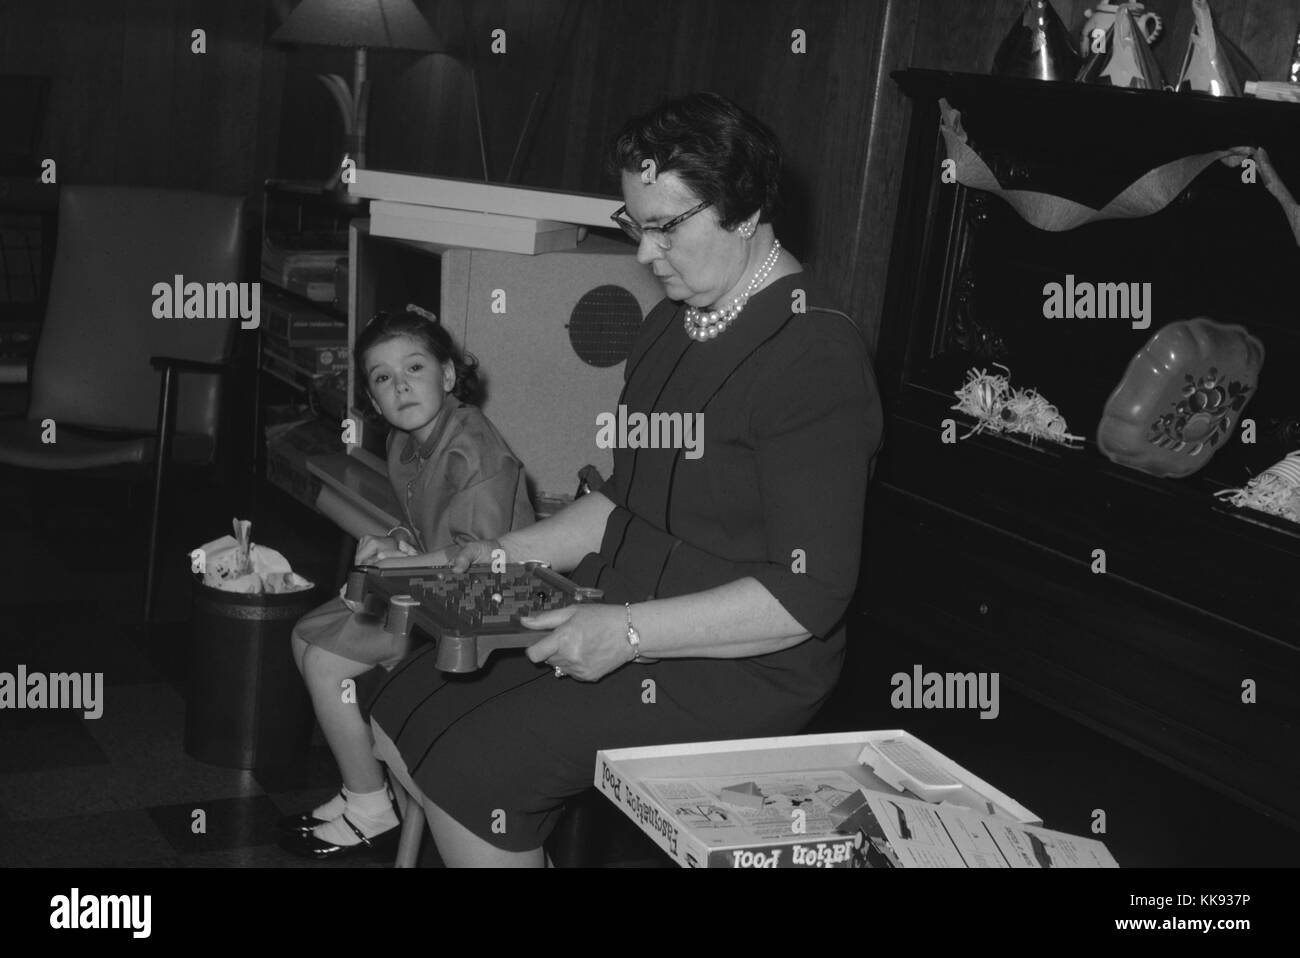 Grandmother in a blue dress sitting upright and playing with a marble board game during a party, while her granddaughter looks on, 1963. Stock Photo